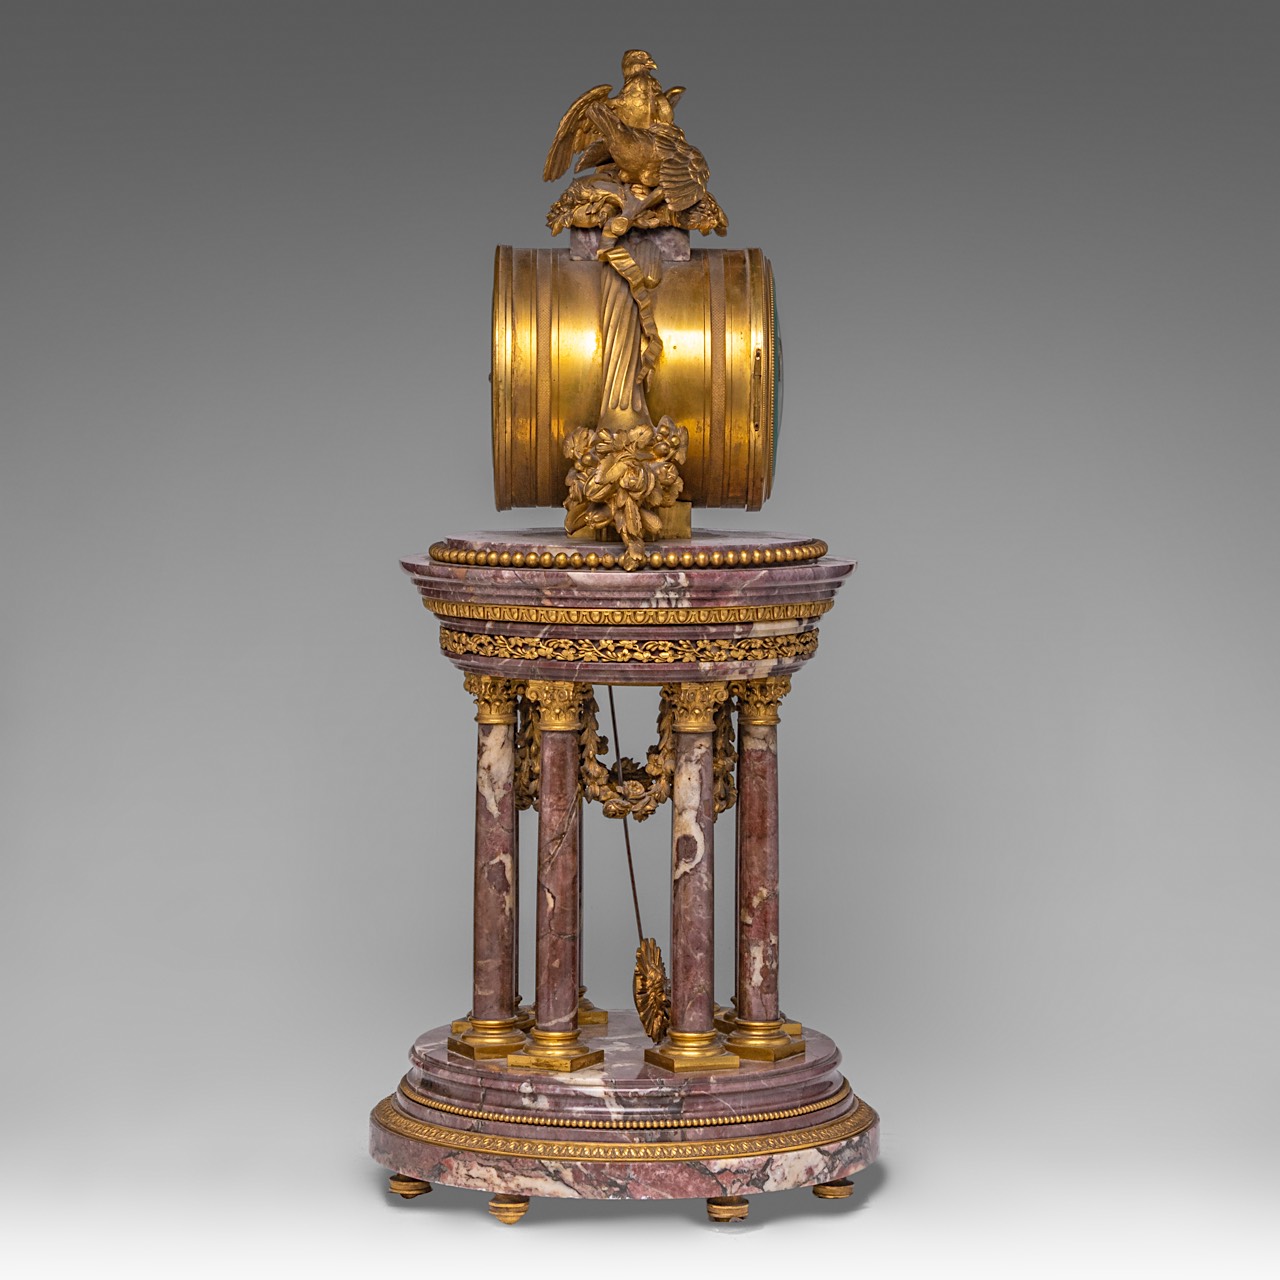 A Louis XVI style gilt bronze mounted marble portico clock, late 19thC, H 63 cm - Image 6 of 6